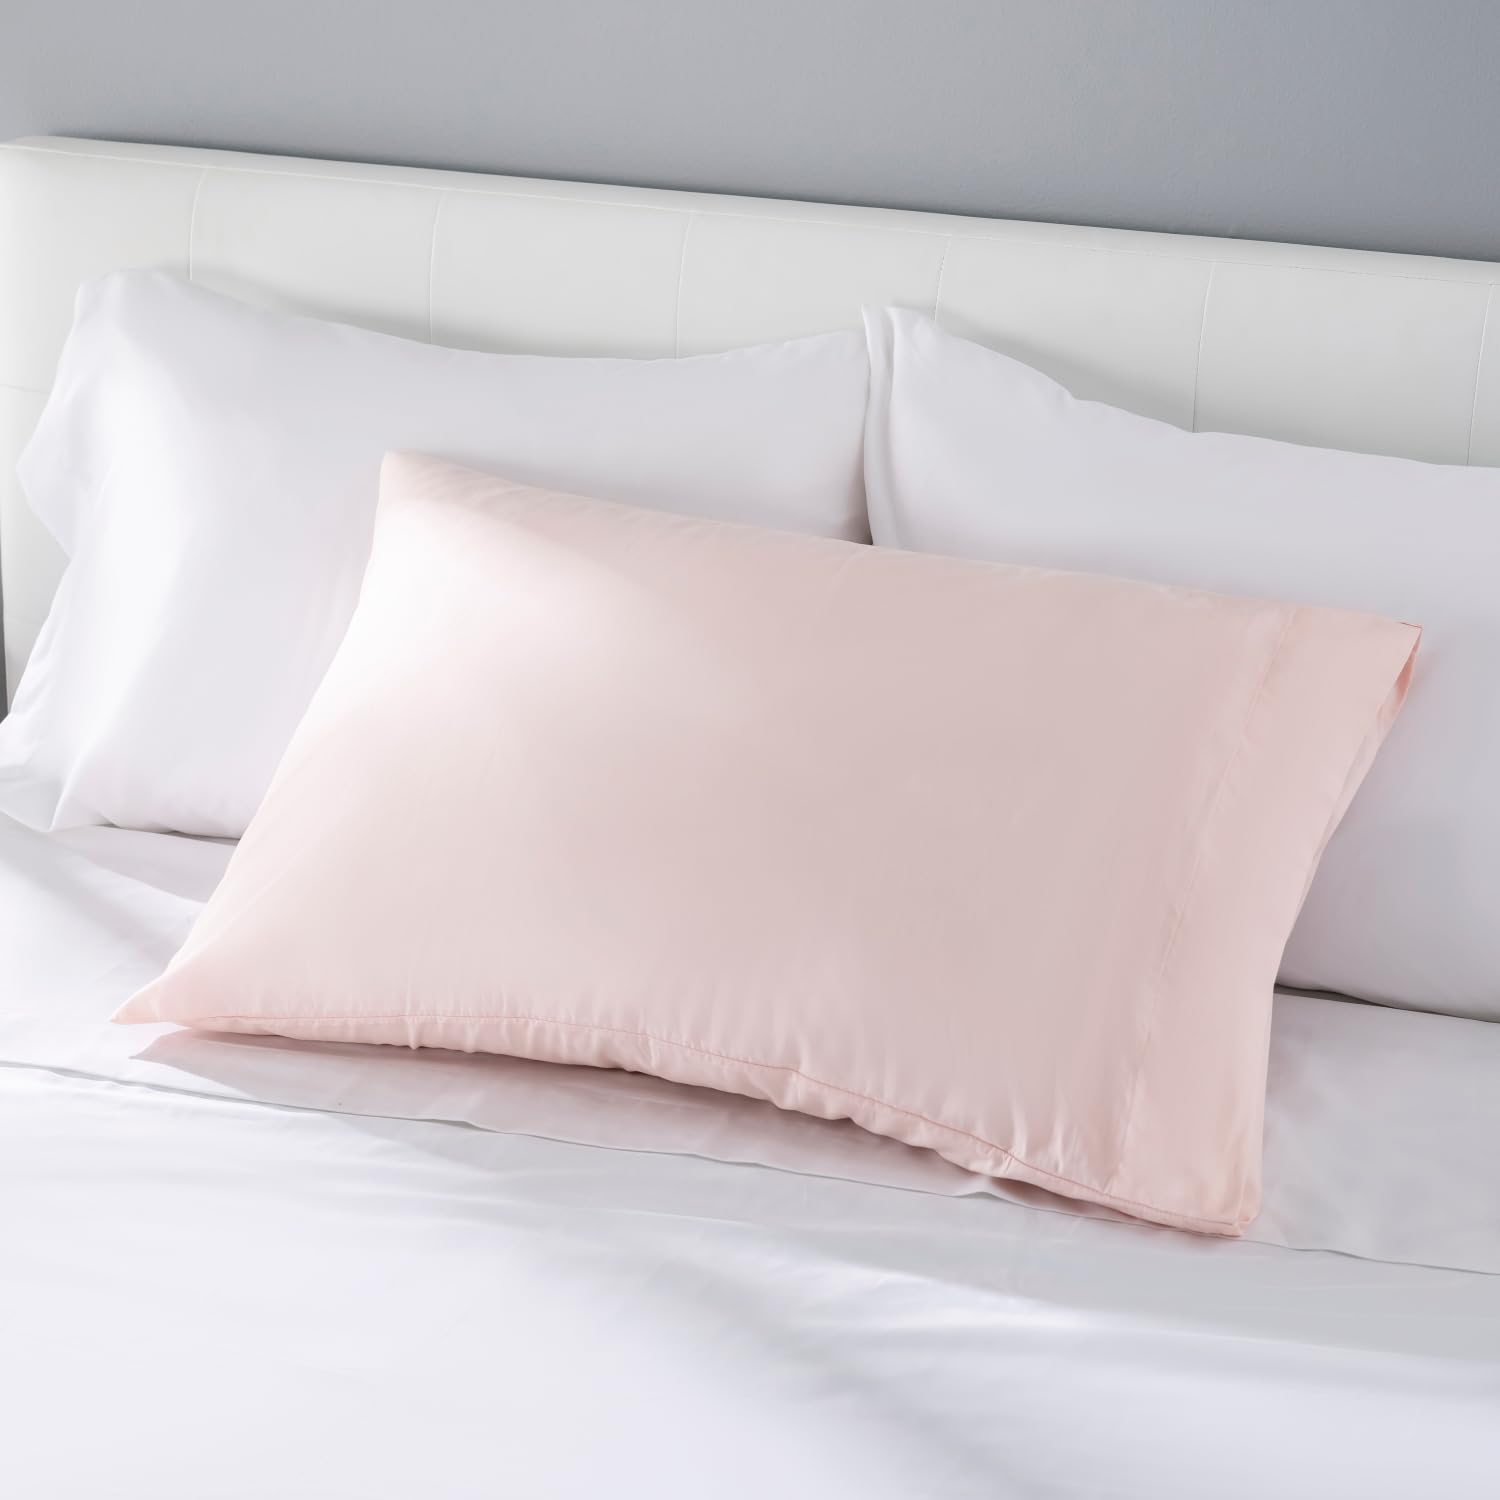 Bacteria-repelling Pillowcase | Get better skin with Silvon